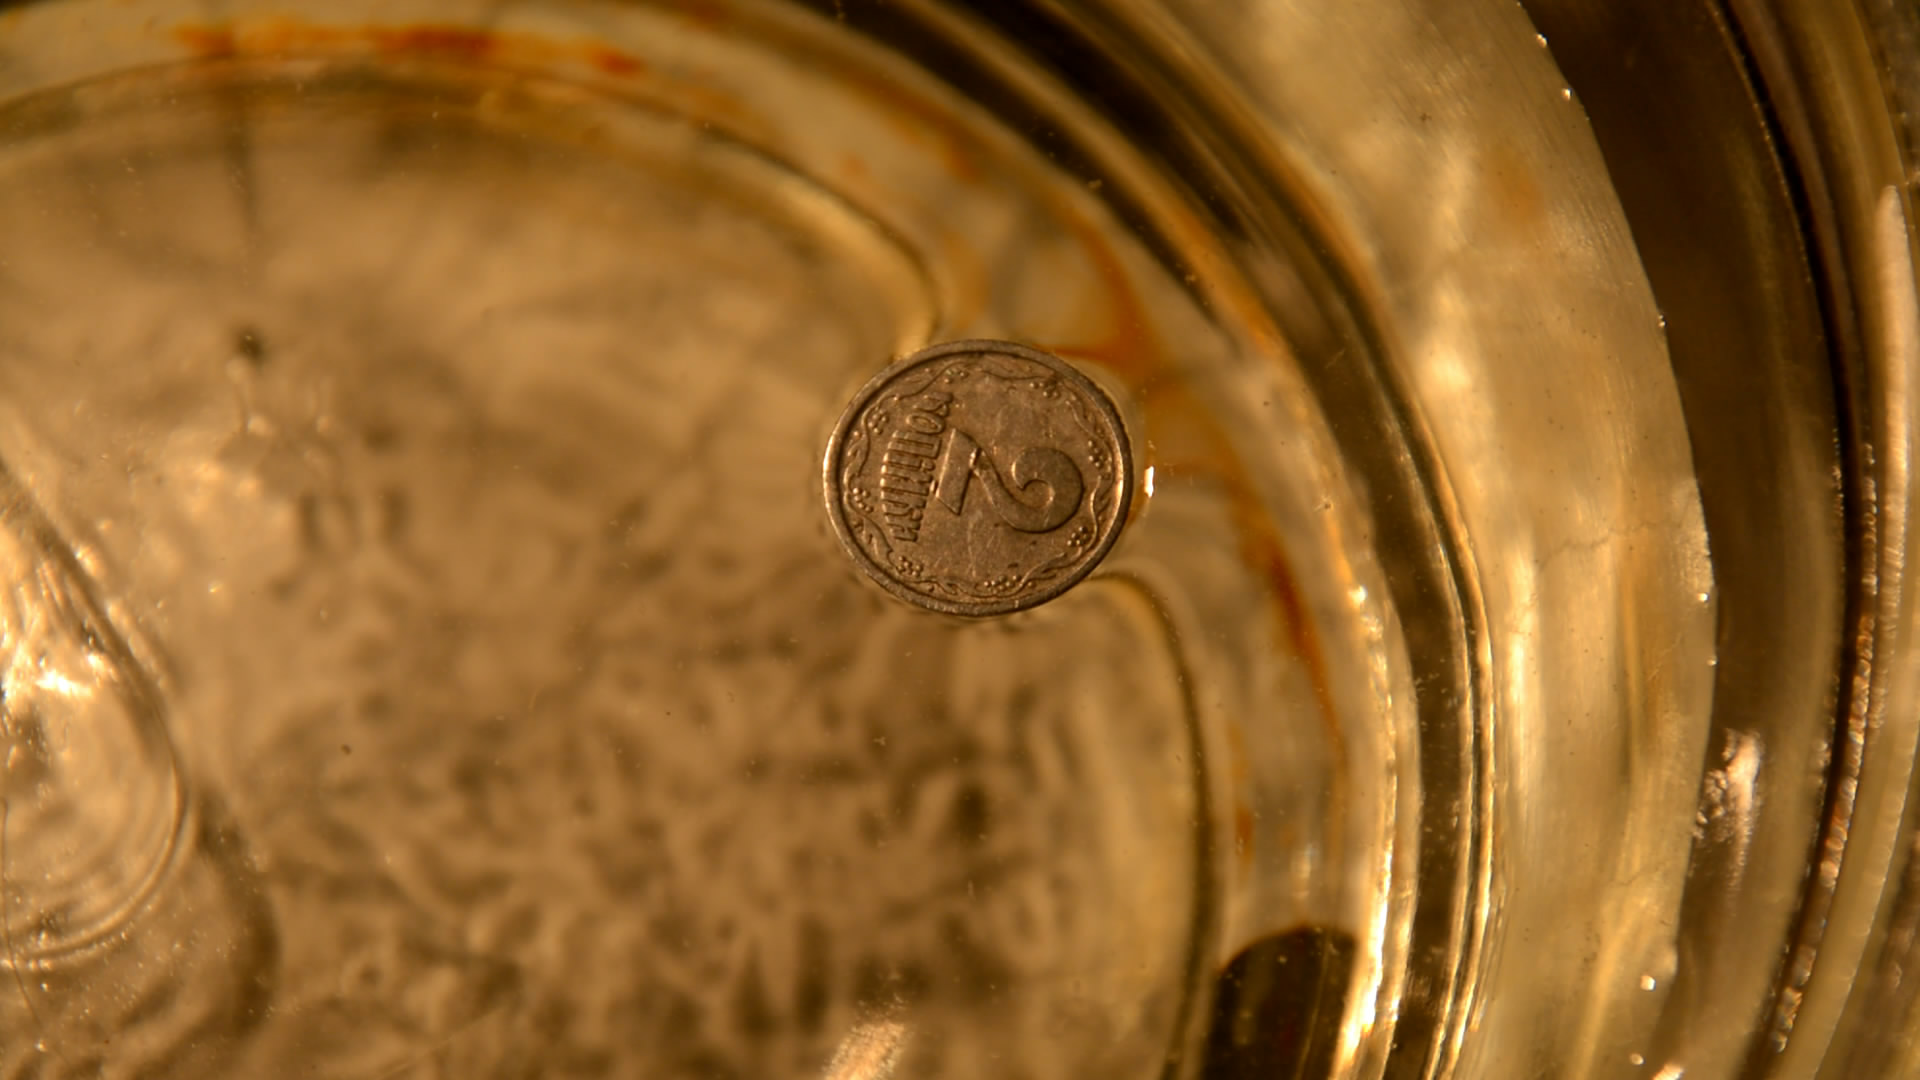     . Floating coin (surface tension)